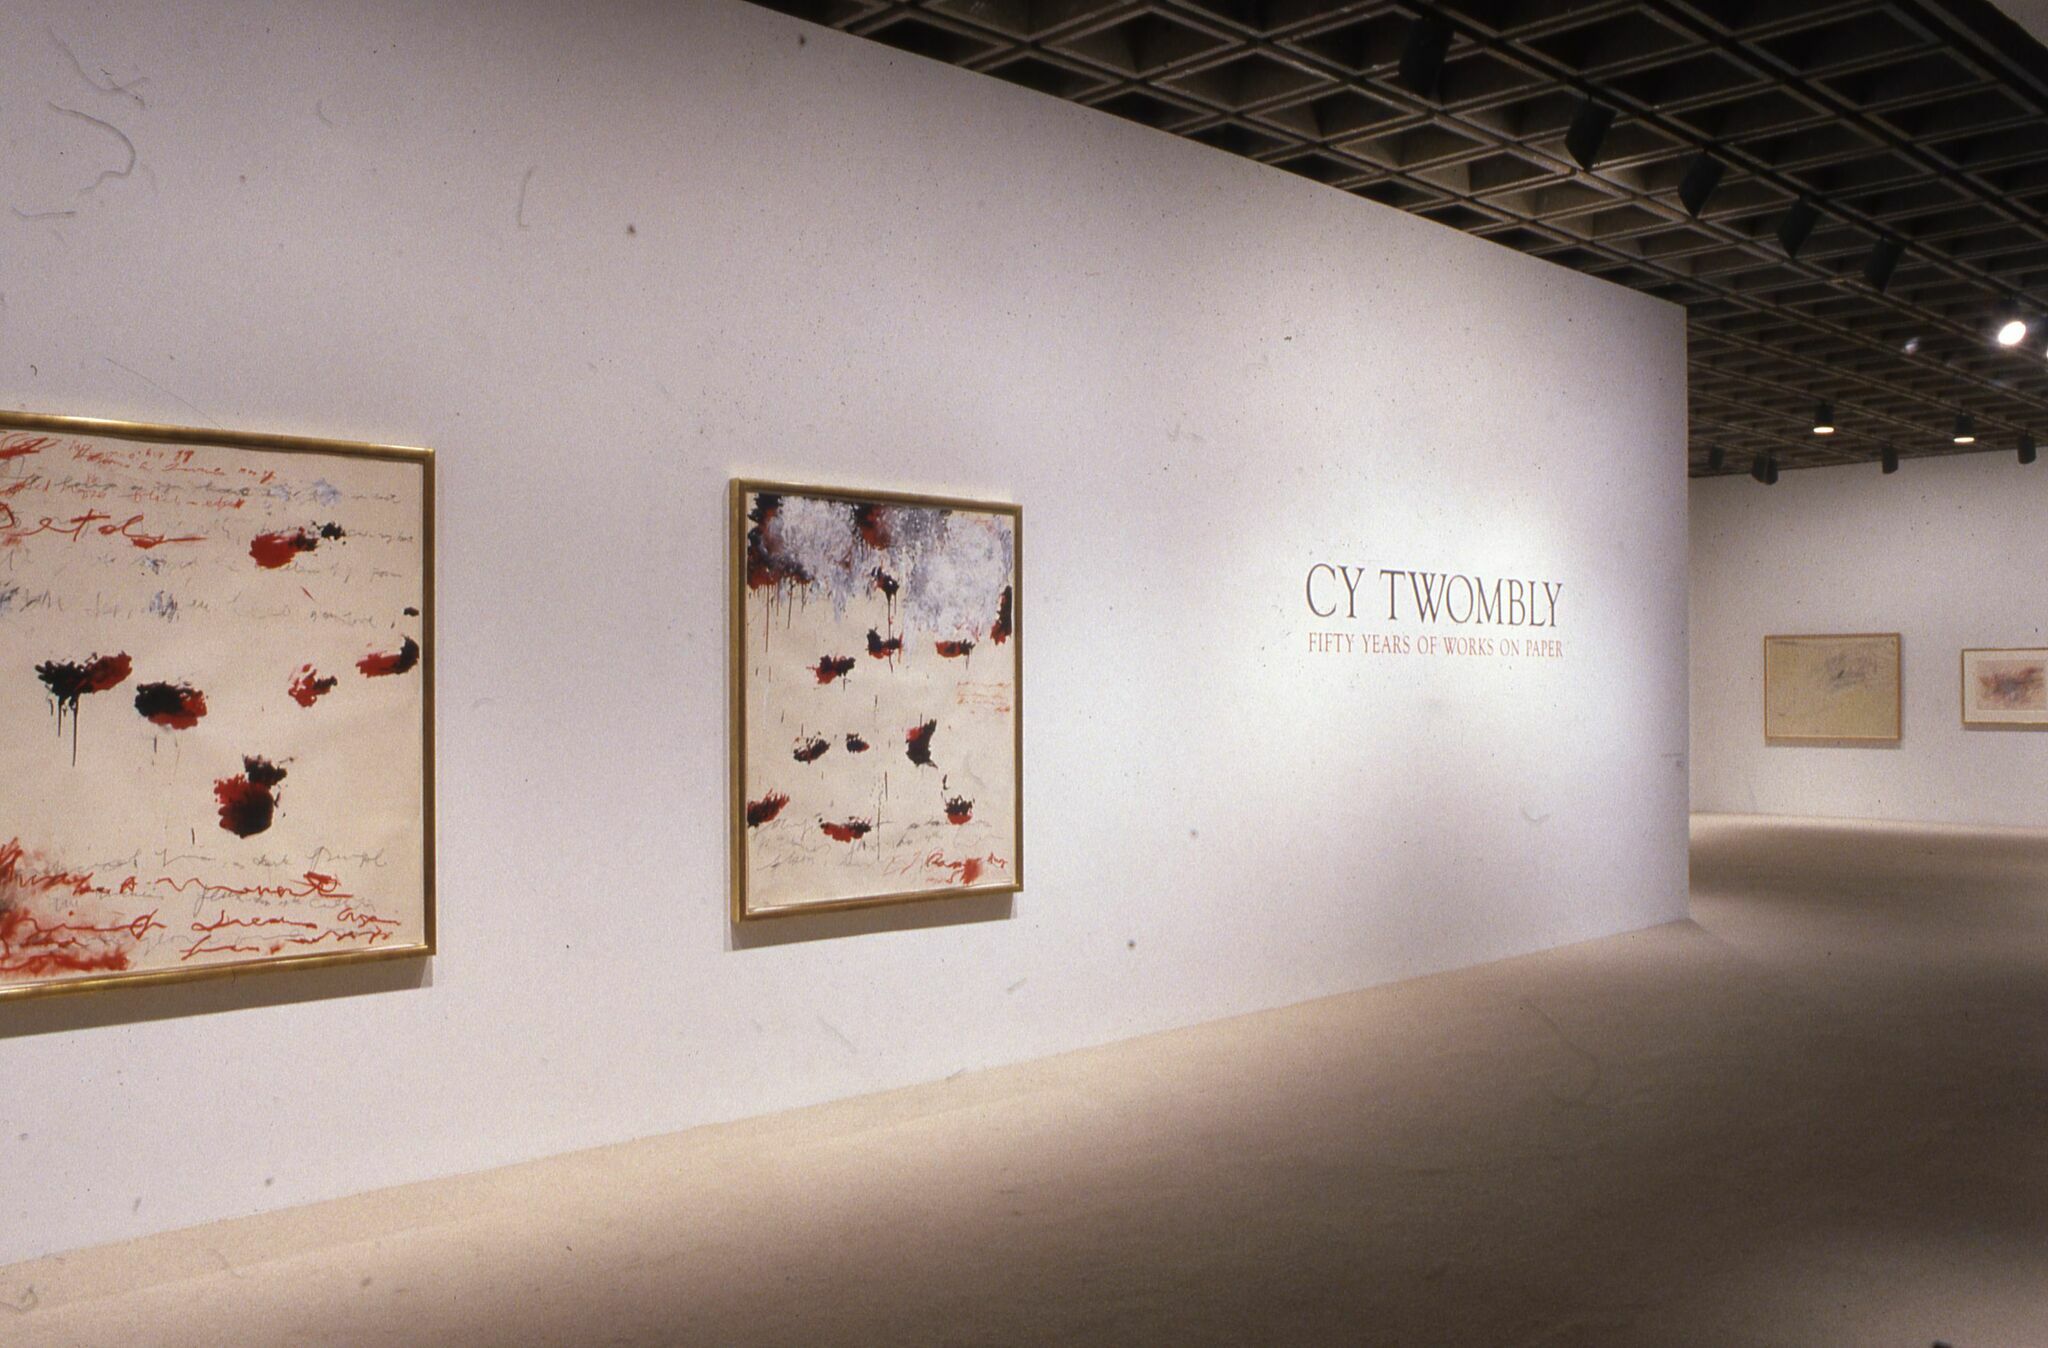 Works of art displayed on a wall alongside wall text for Cy Twombly: Fifty Years of Works on Paper.